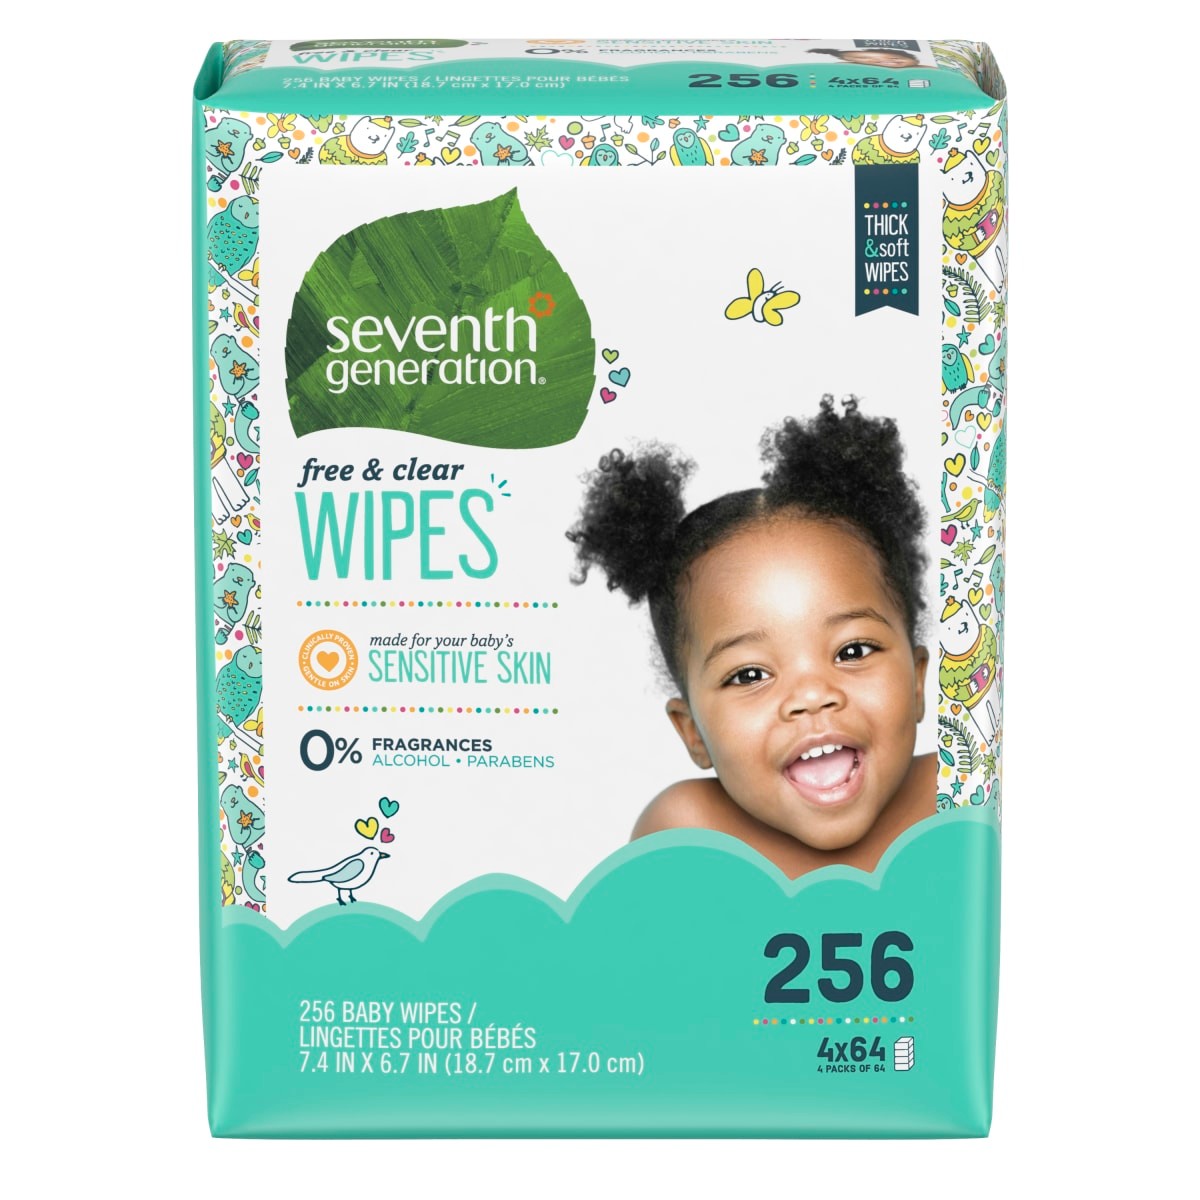 MomRemedy Hydrogen Peroxide Wipes, 30 Count, Pack of 2, MR-WP30X2